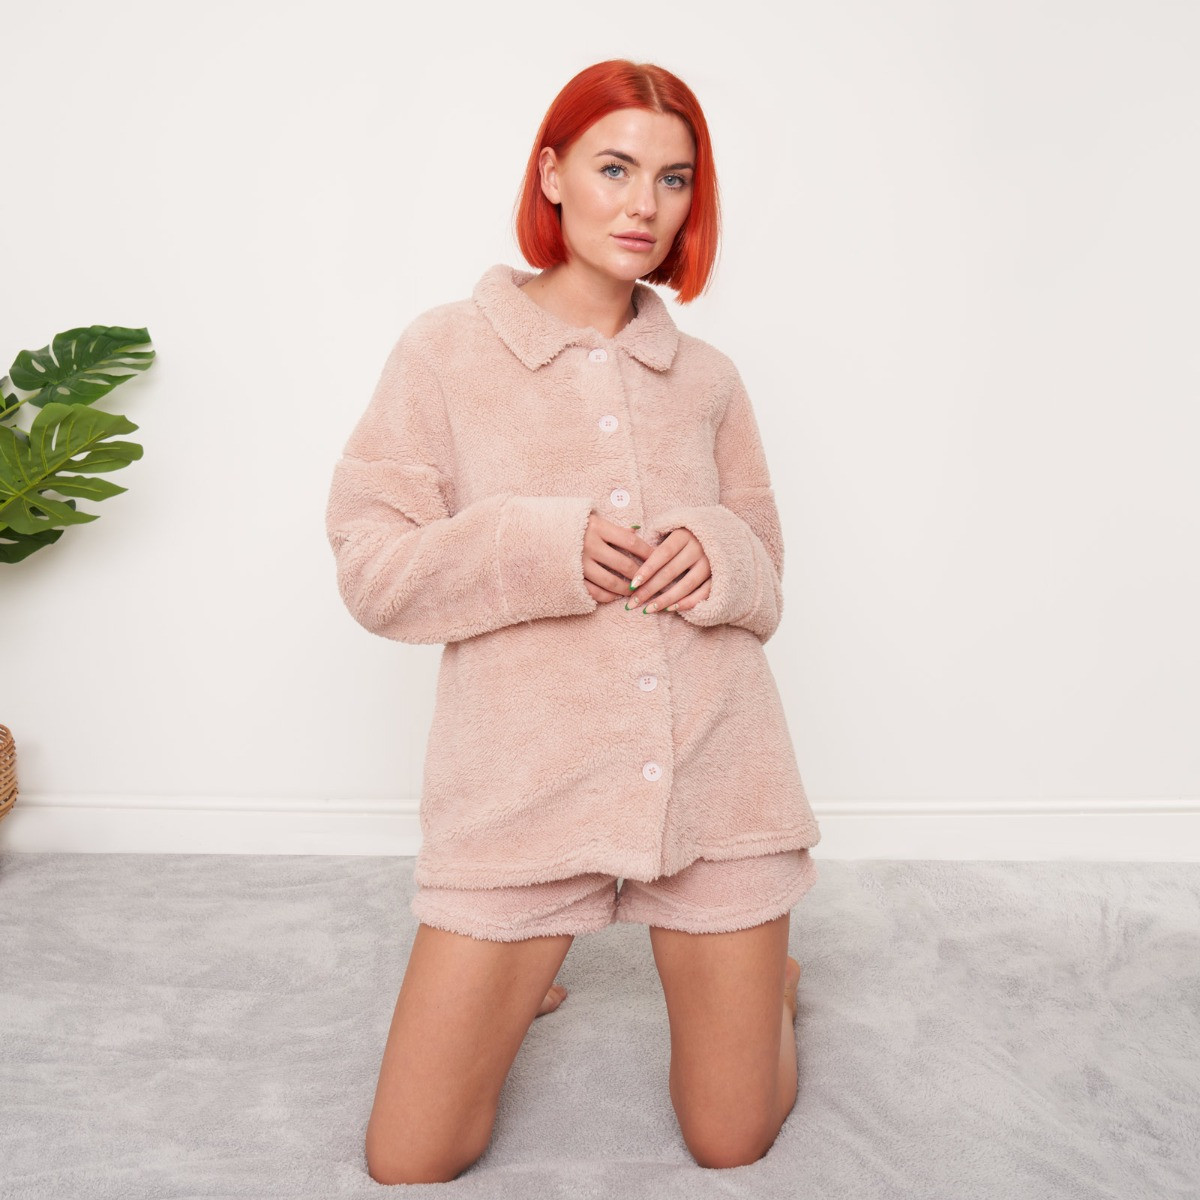 OHS Teddy Button Up Over Shirt - Blush>